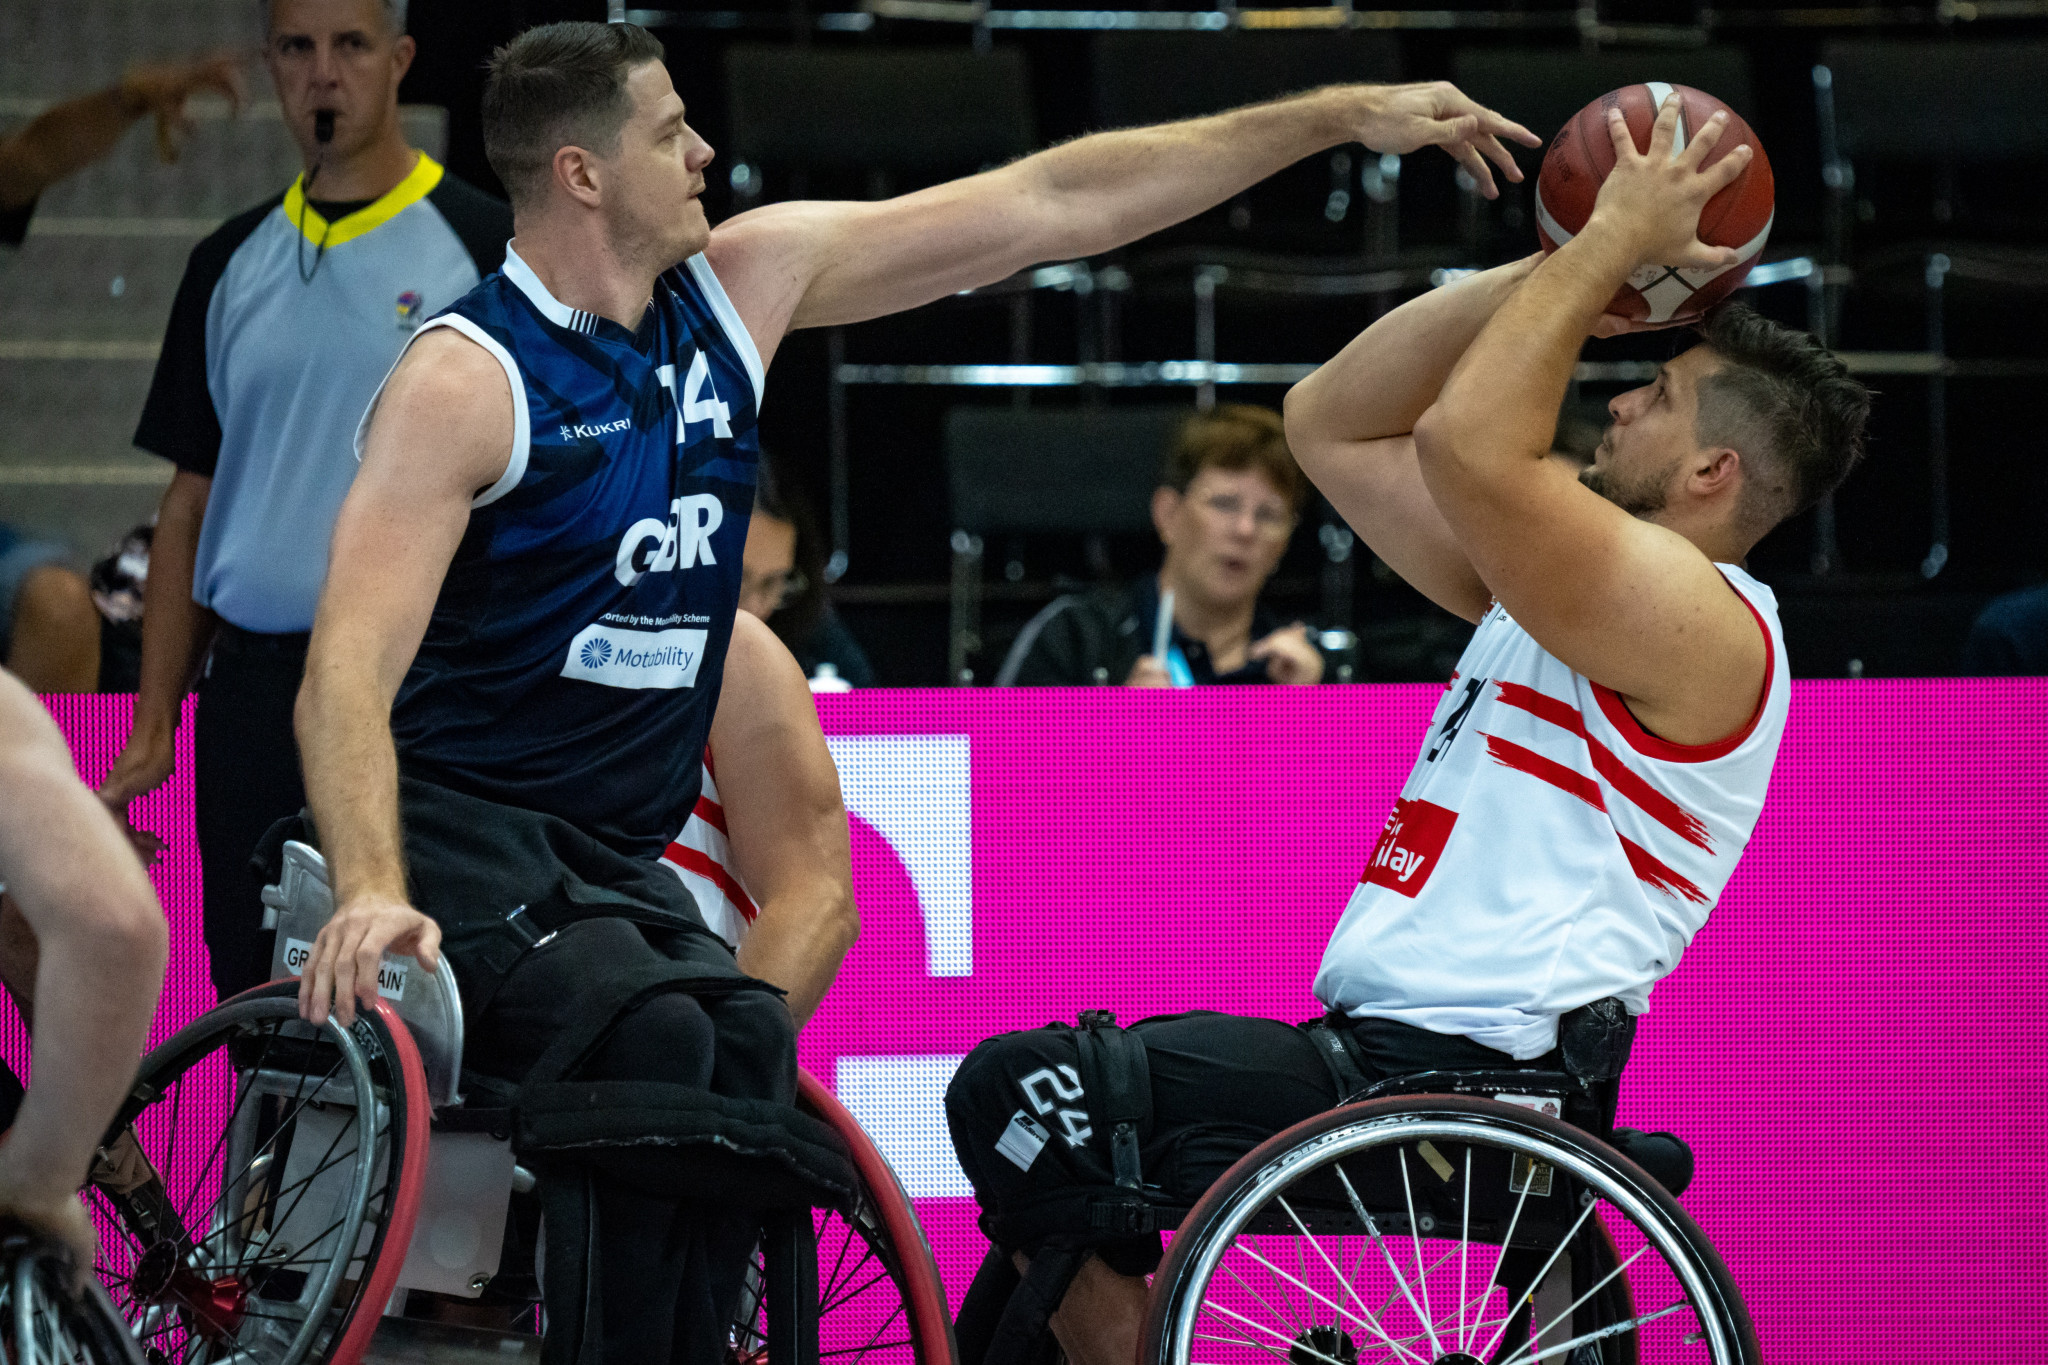 Britain defend well in their 100-50 thrashing of Austria ©EPC